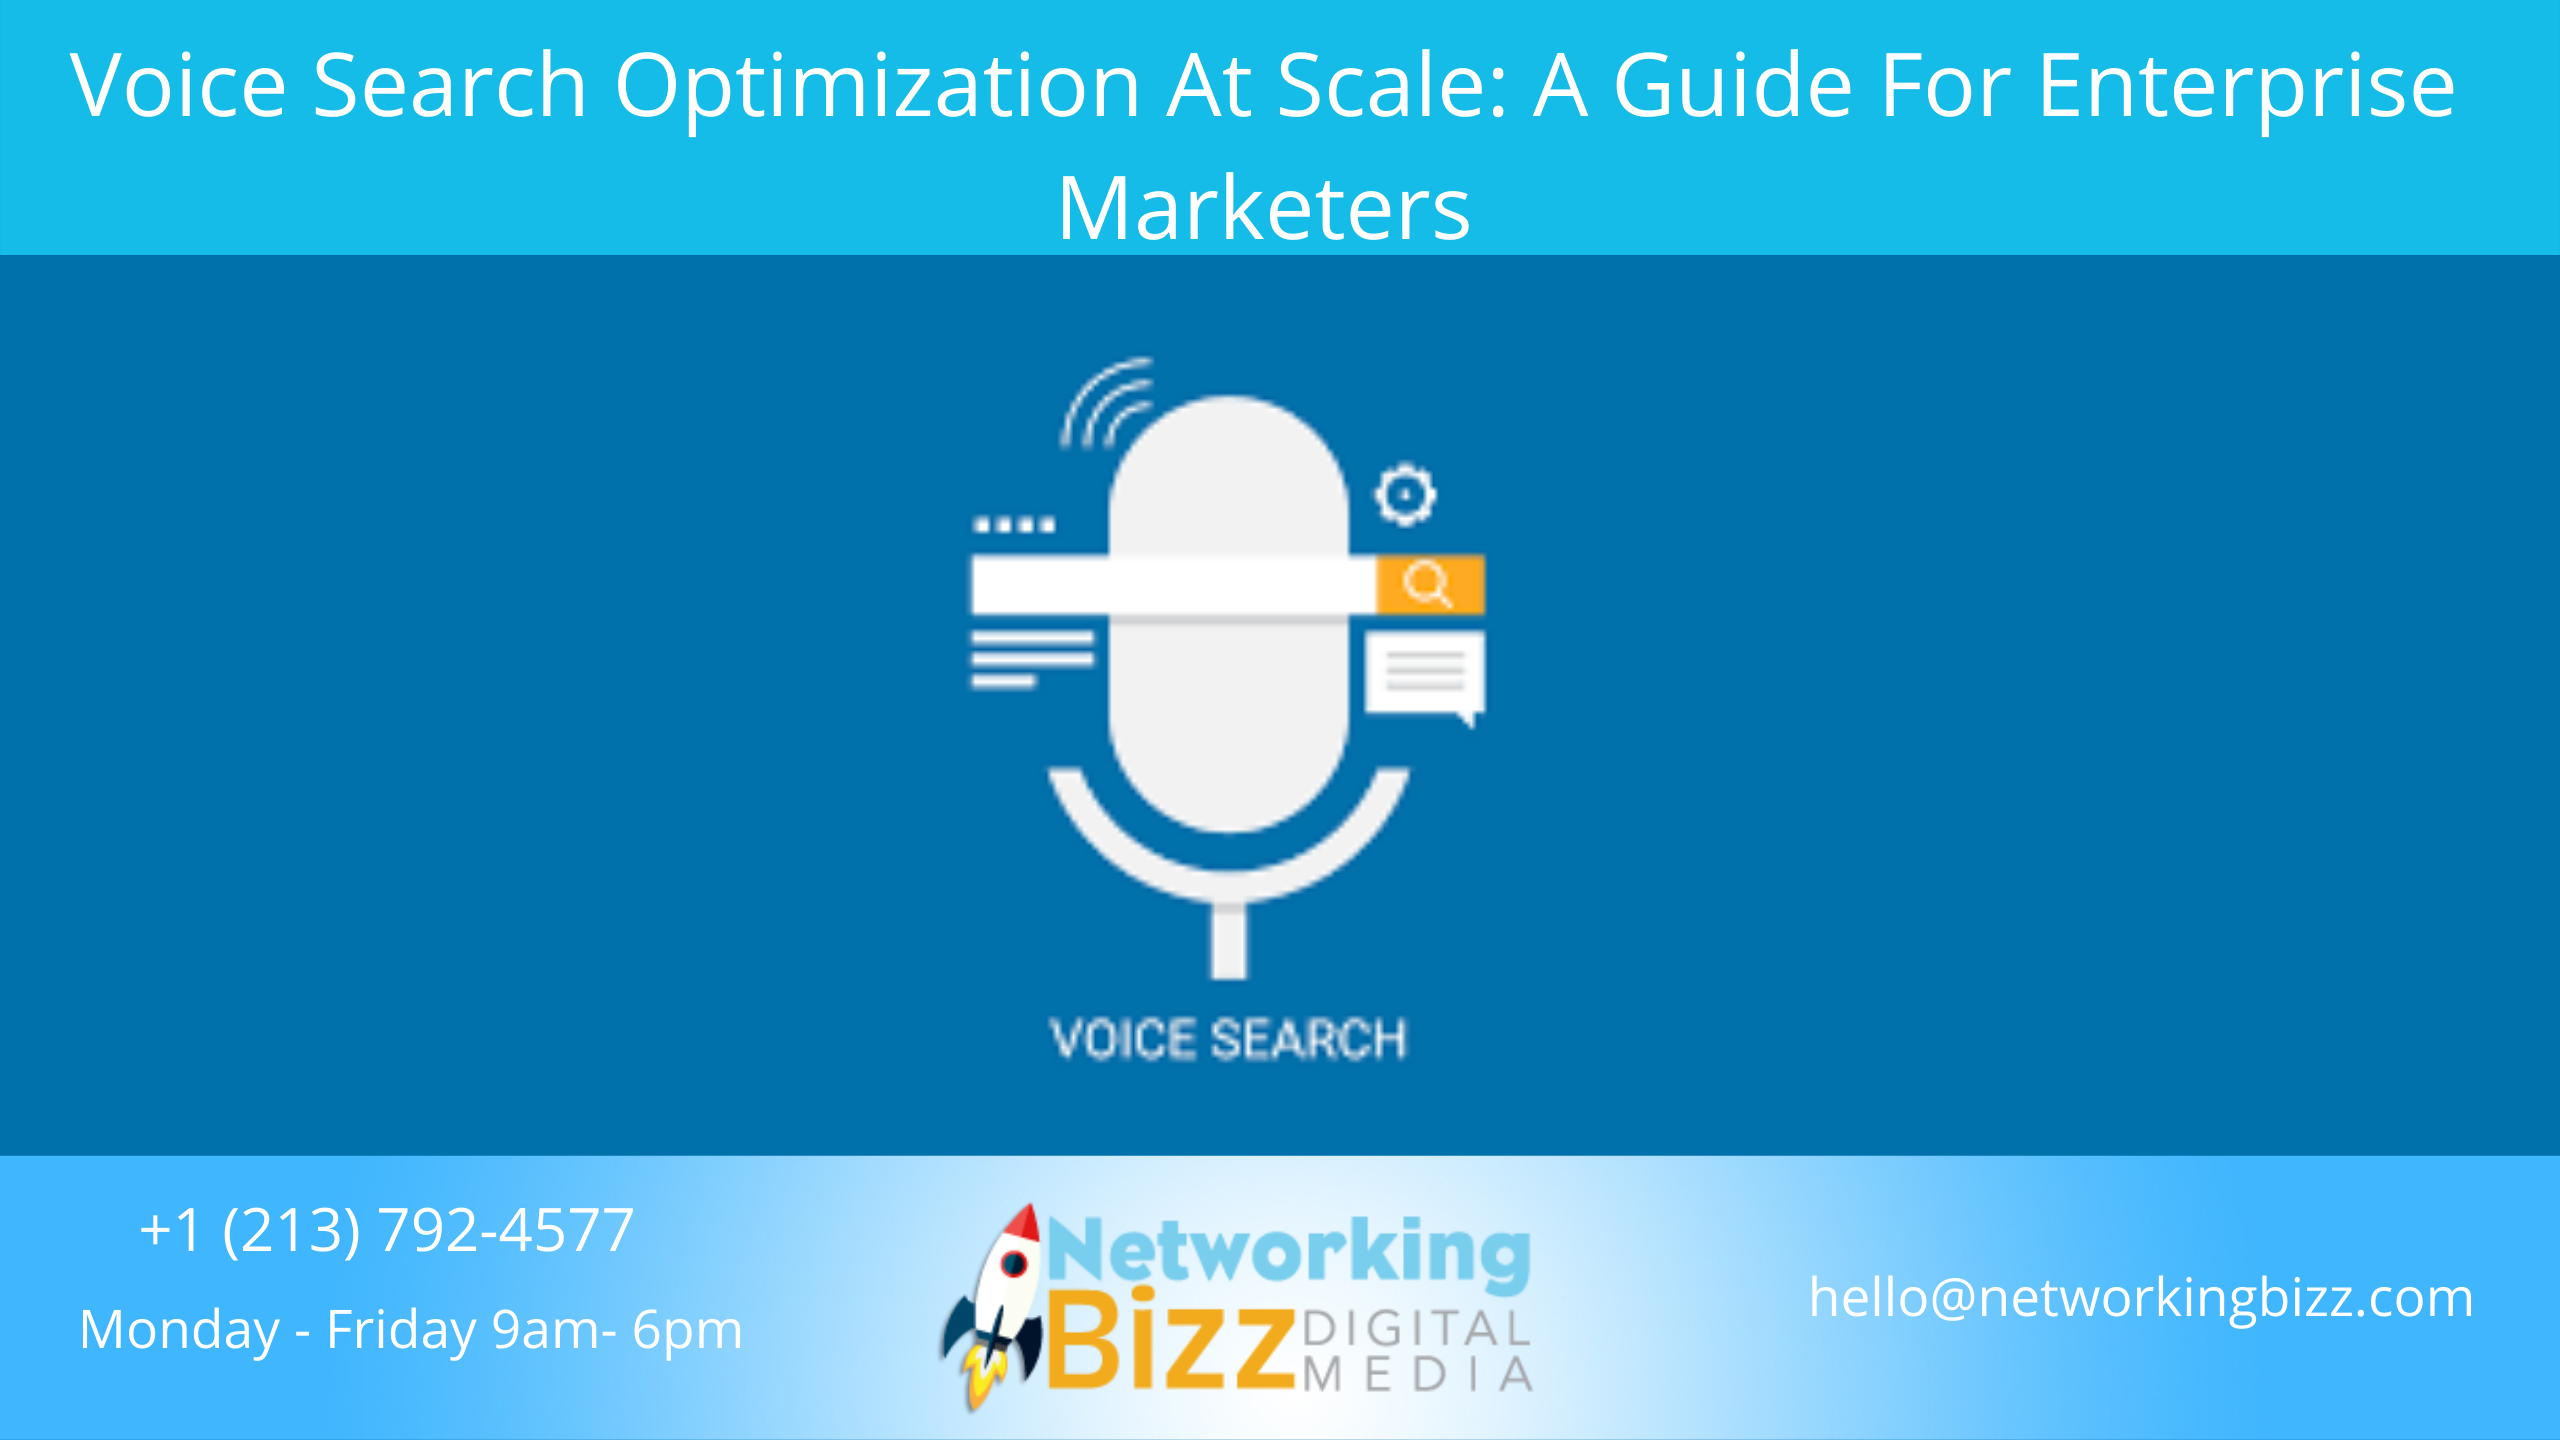 Voice Search Optimization At Scale: A Guide For Enterprise Marketers